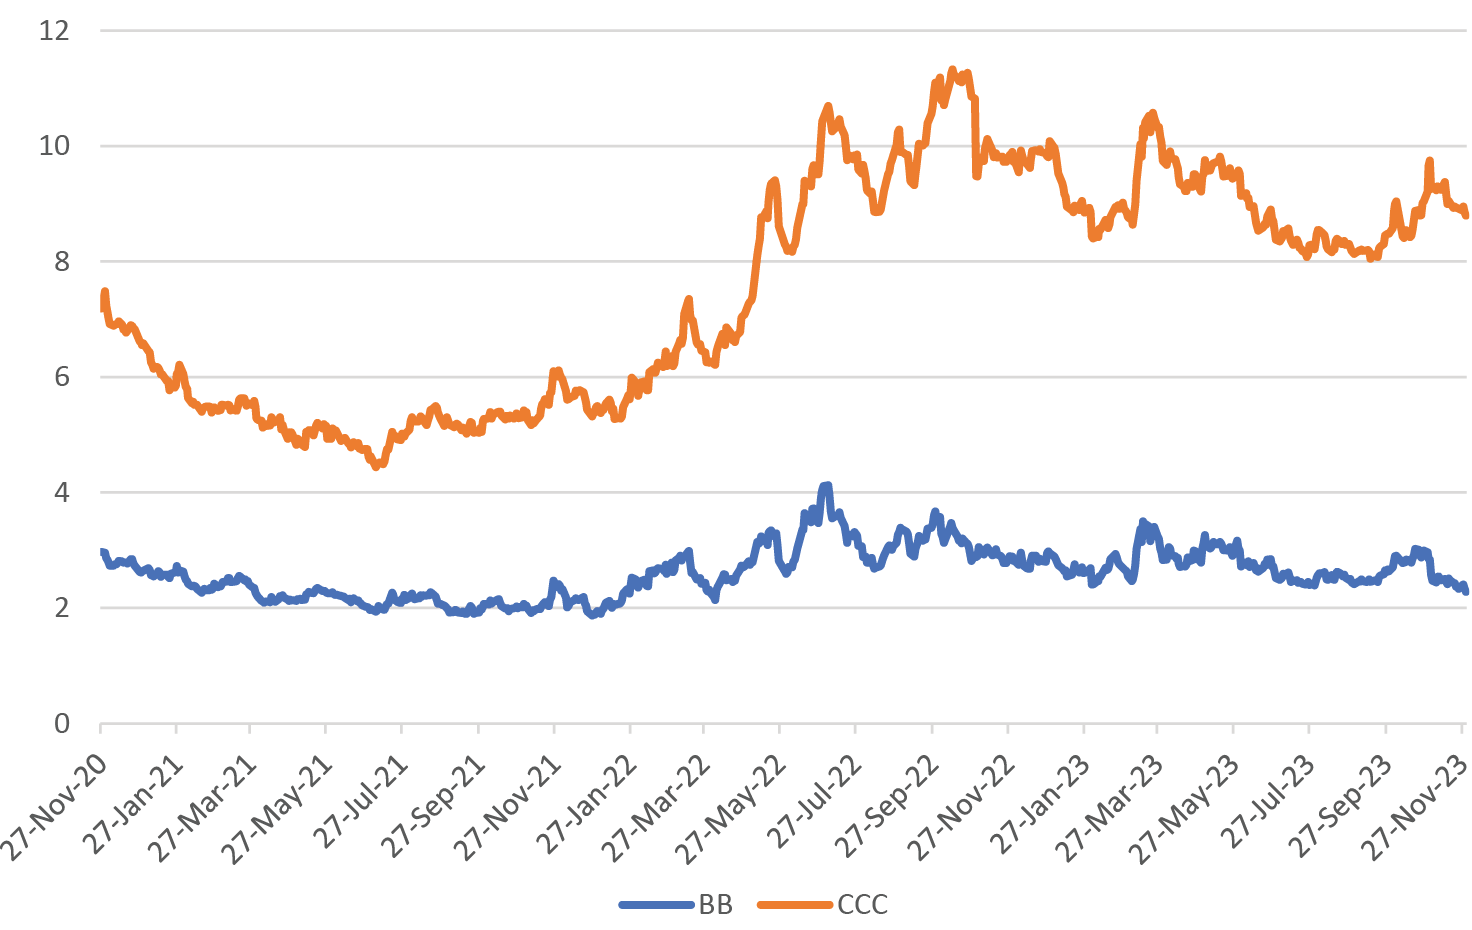 Option-Adjusted Spreads % in BB-Rated Issues vs. CCC-Rated Issues